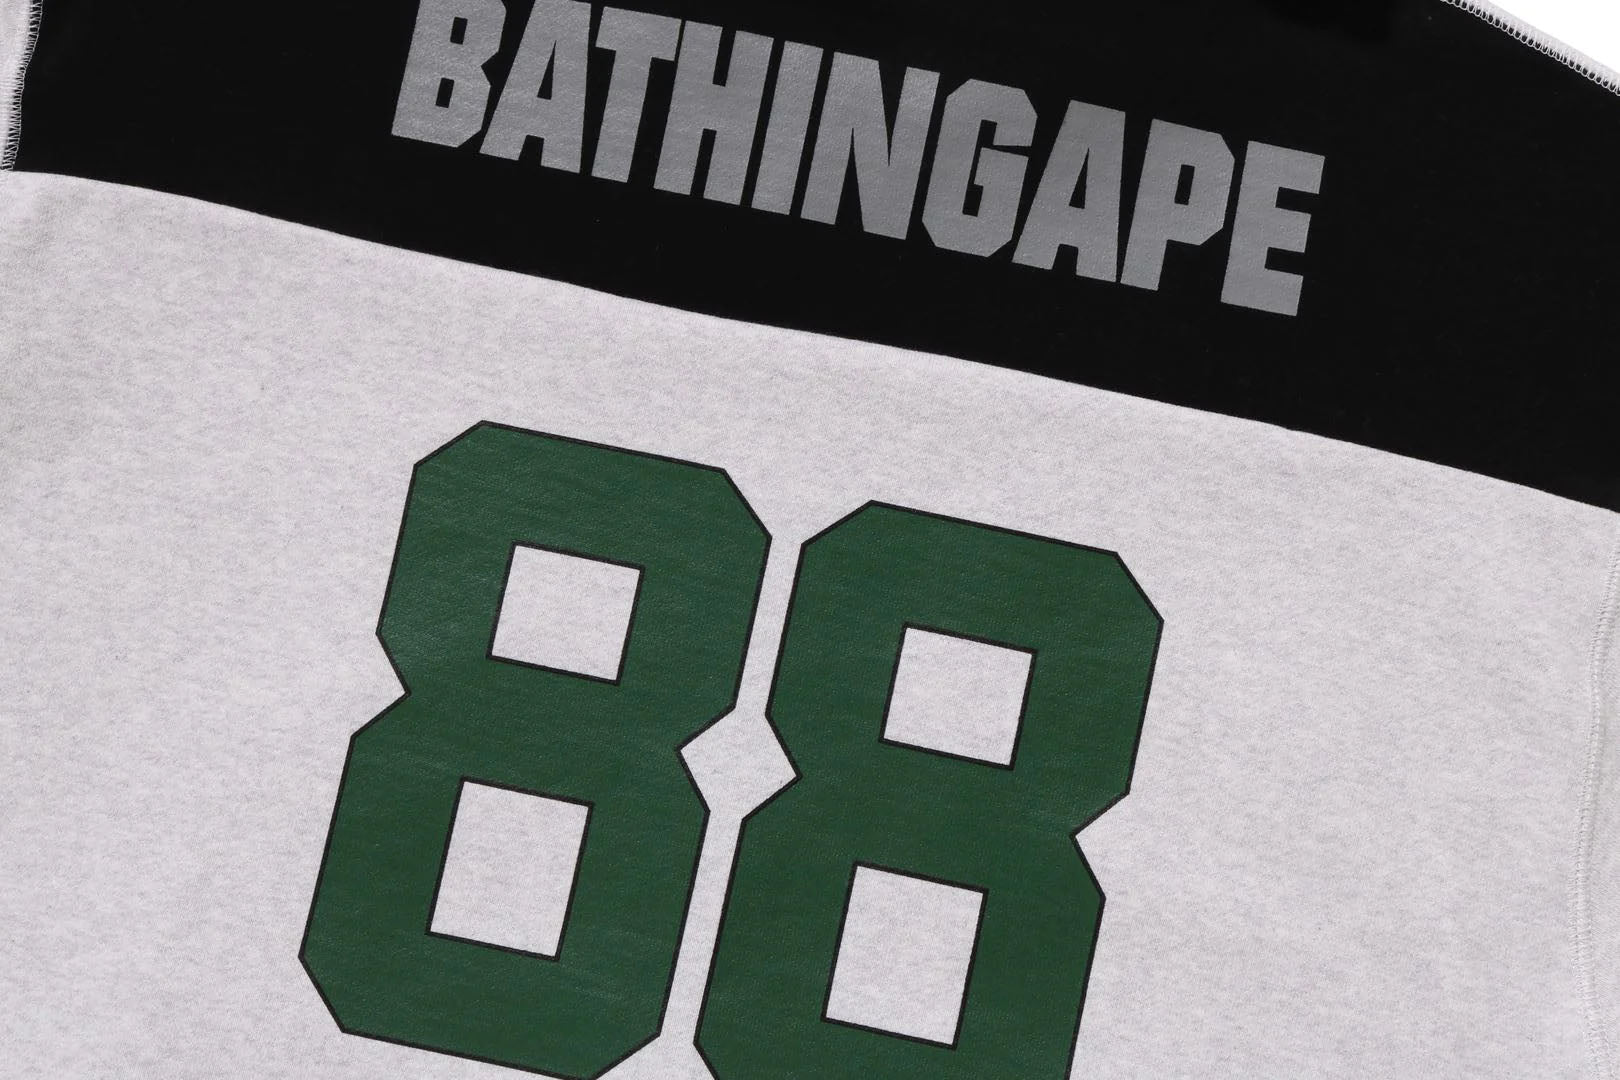 A BATHING APE FOOTBALL JERSEY ( Relaxed Fit Type ) – happyjagabee store